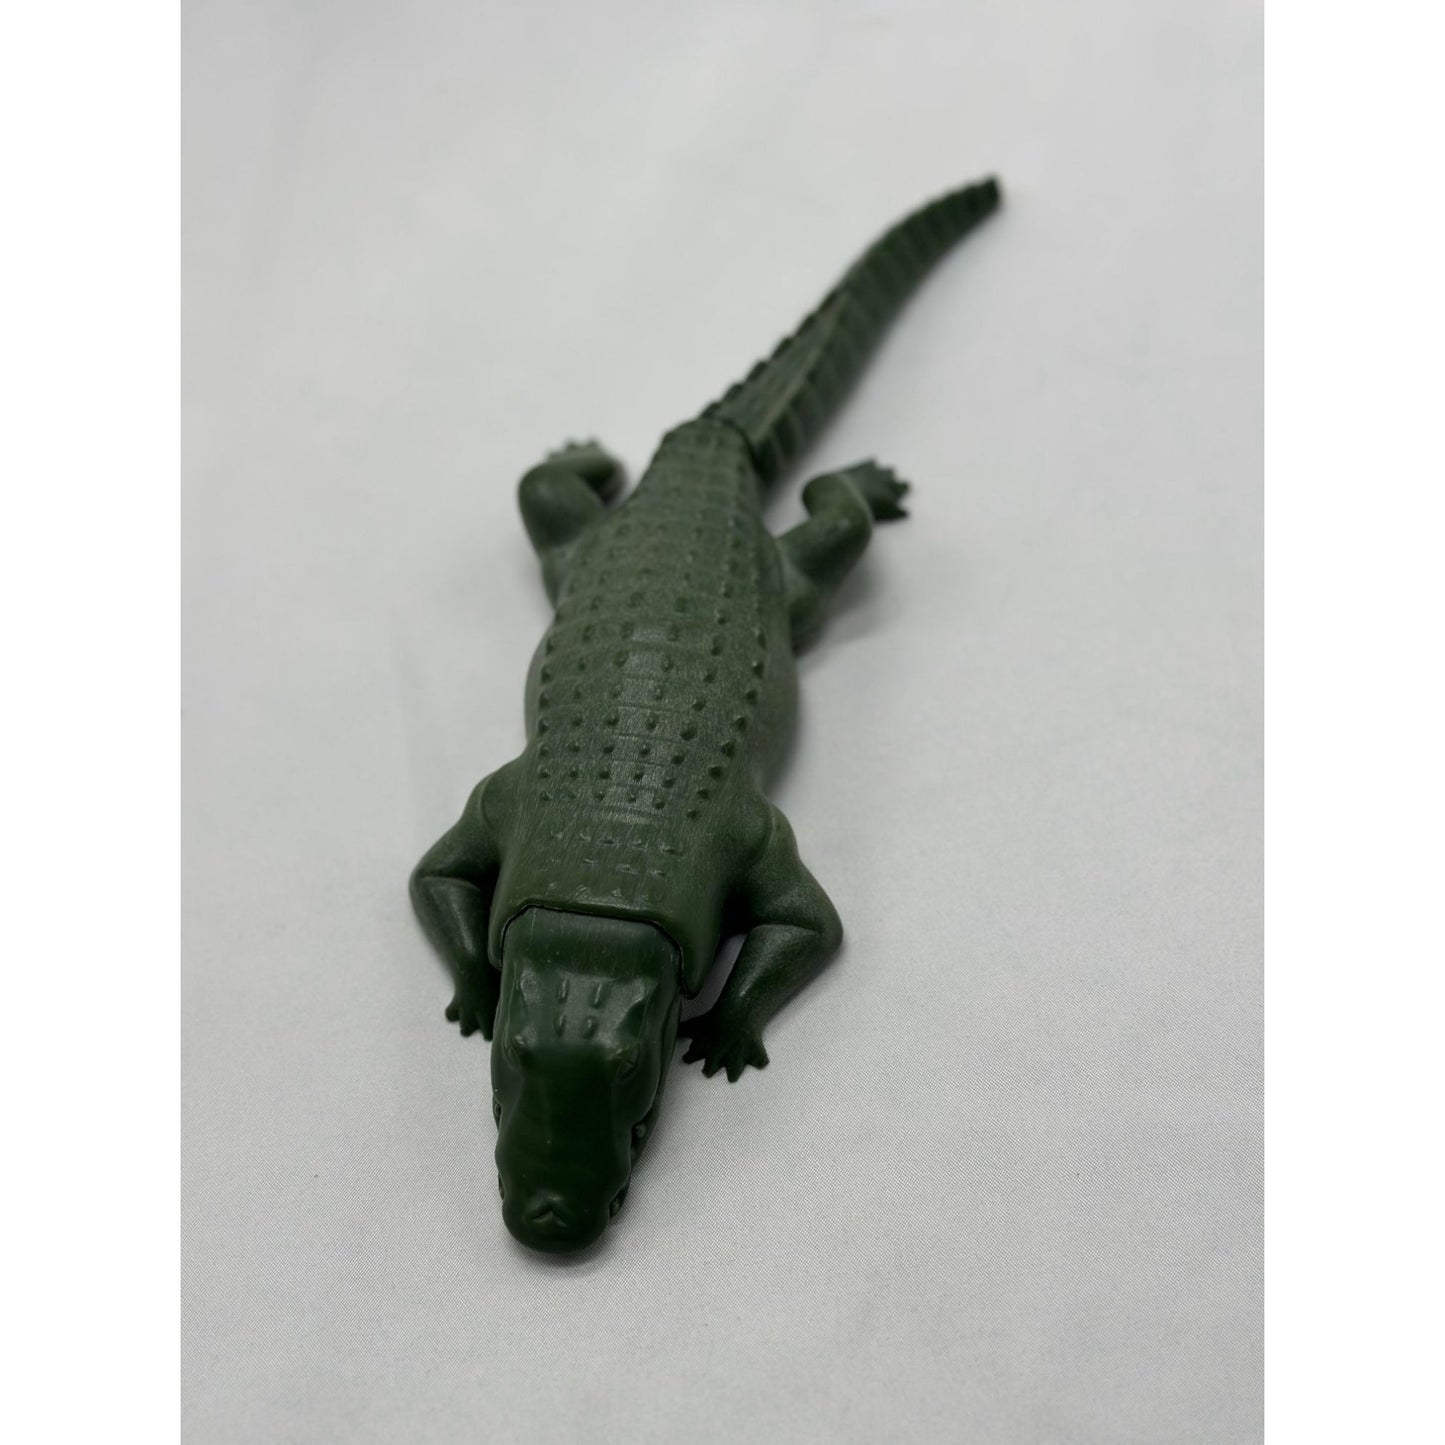 Vintage Playmobil Alligator Croc Rare Collectible Toy Excellent Condition Must-Have 9"